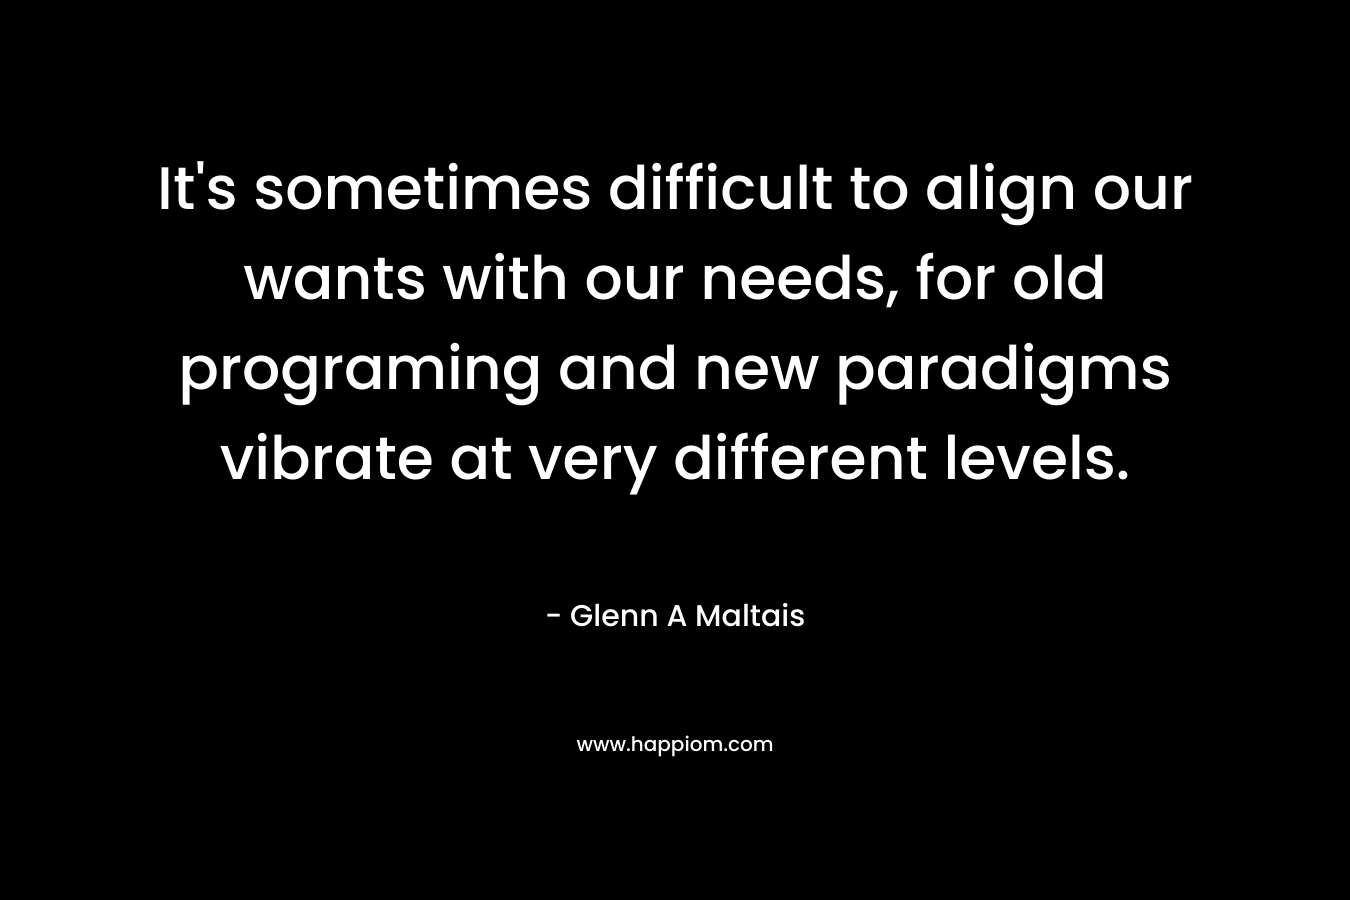 It’s sometimes difficult to align our wants with our needs, for old programing and new paradigms vibrate at very different levels. – Glenn A Maltais